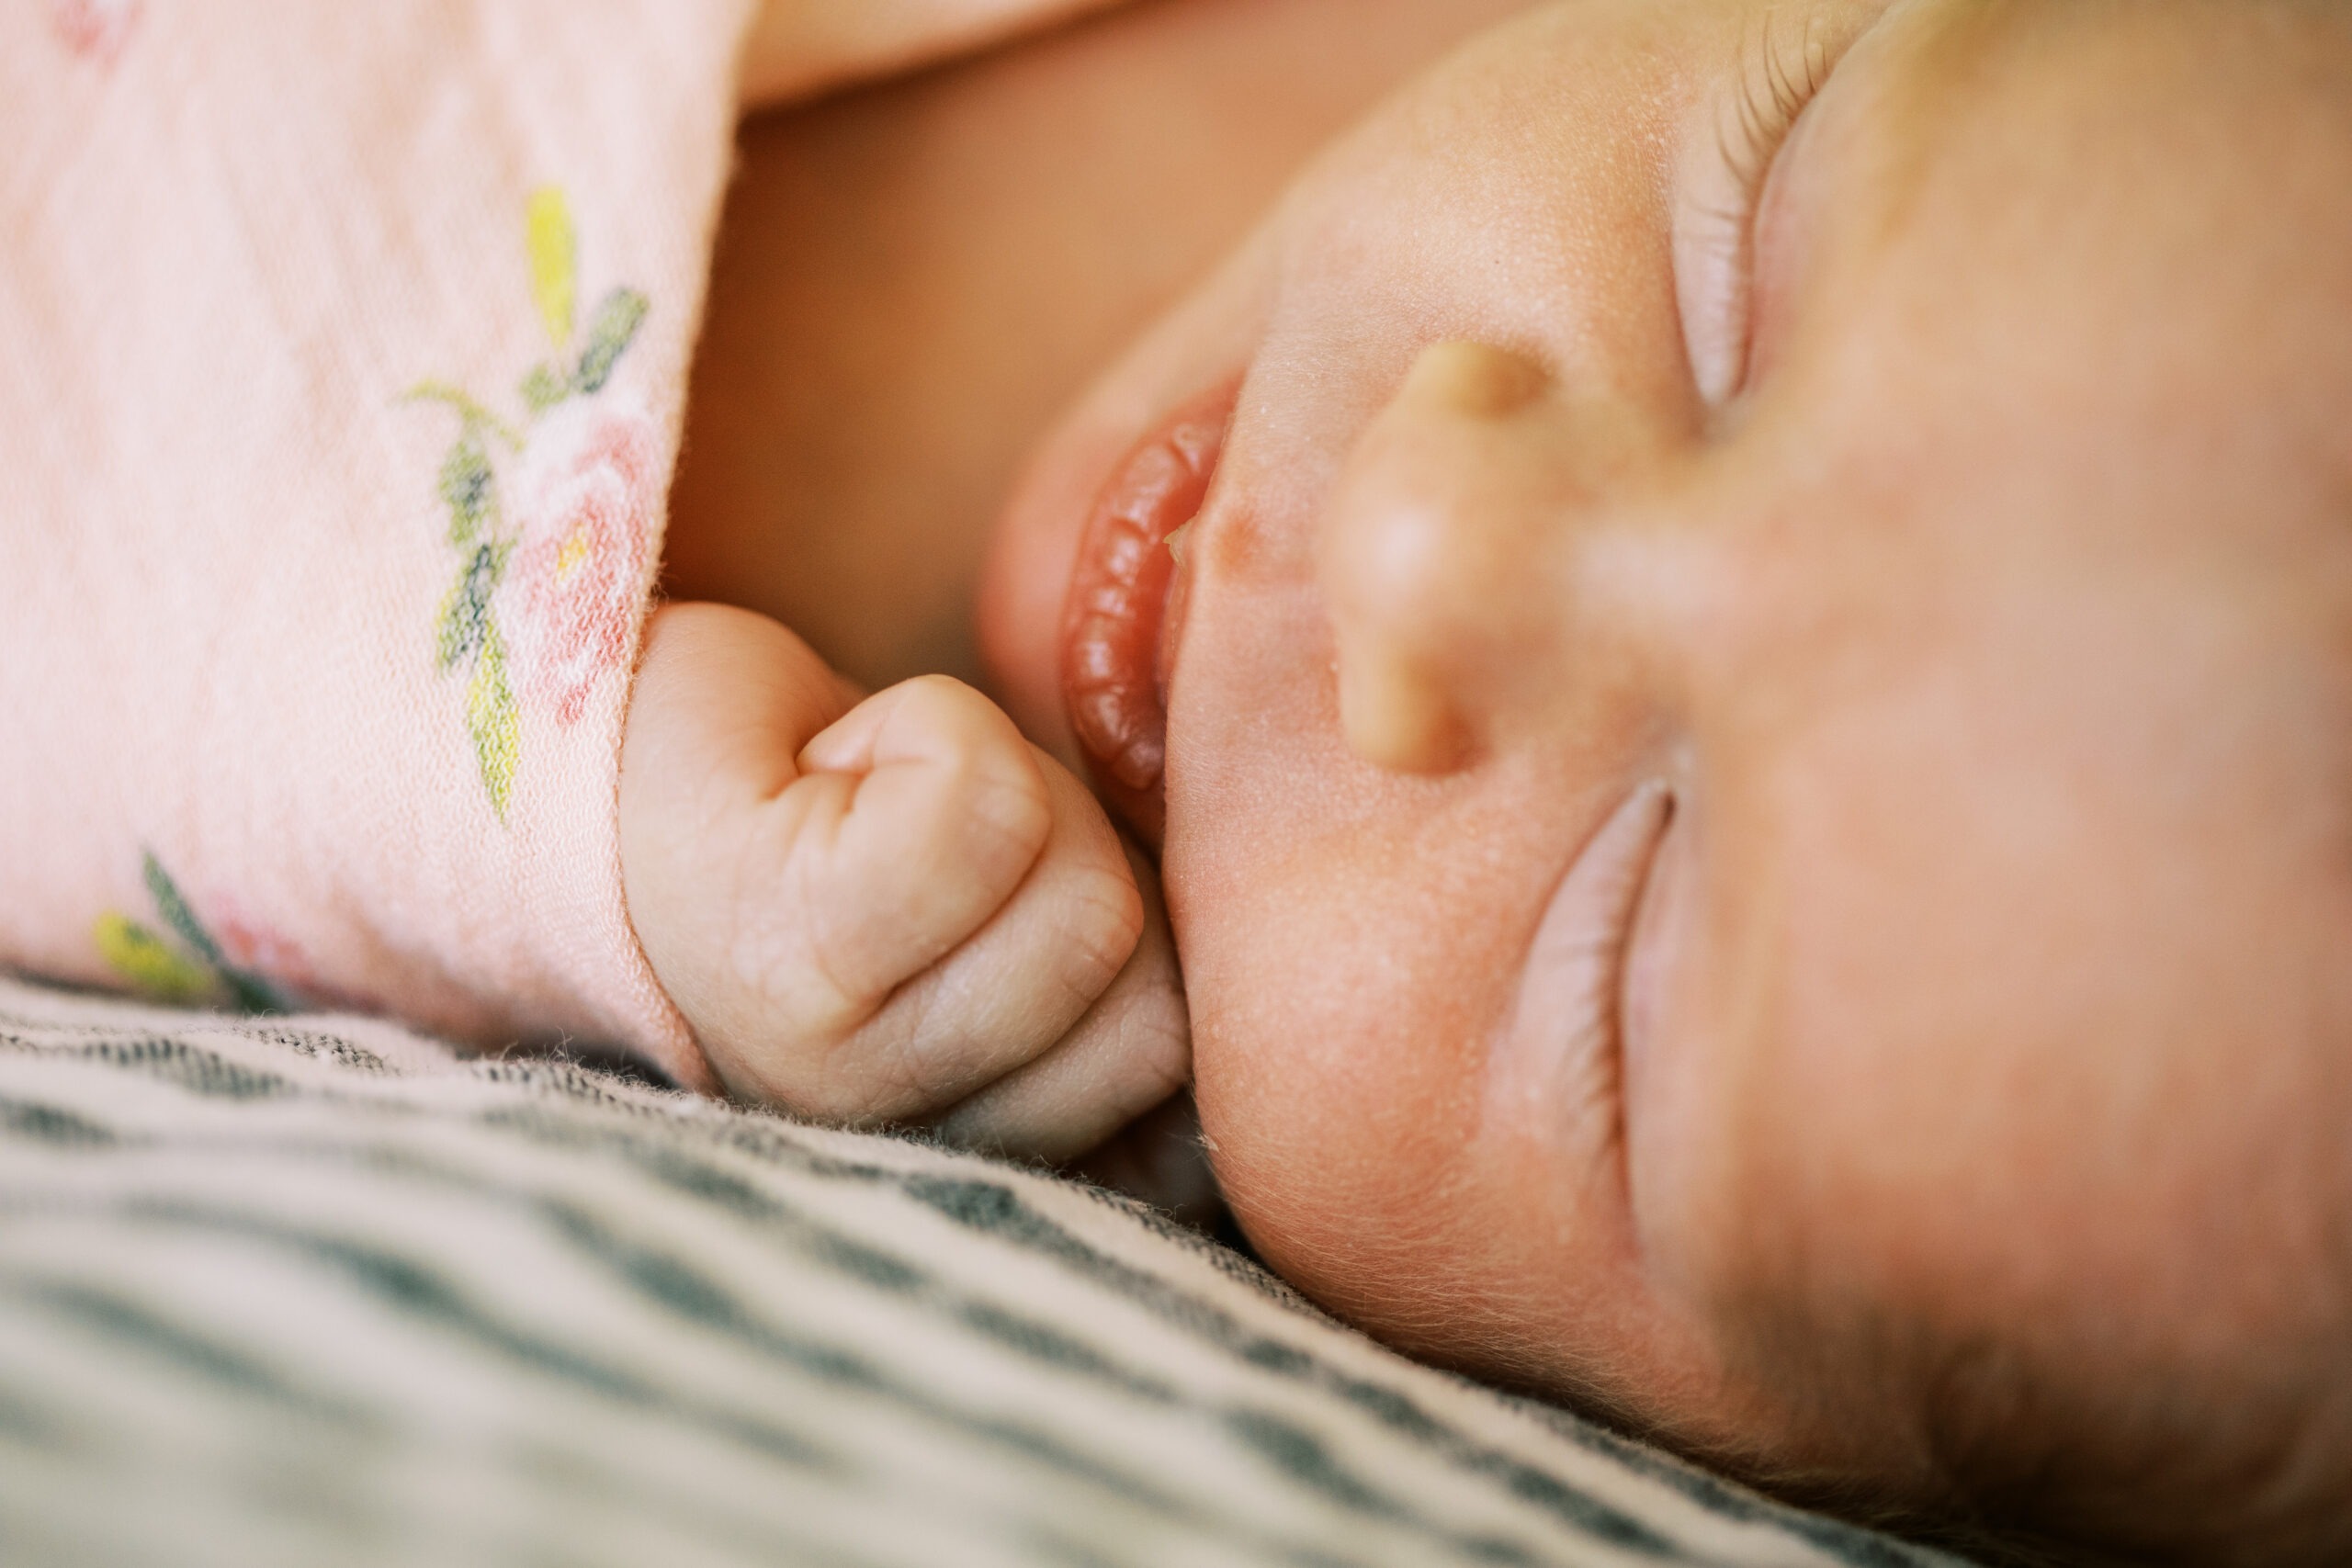 detail of a newborn baby girl's face